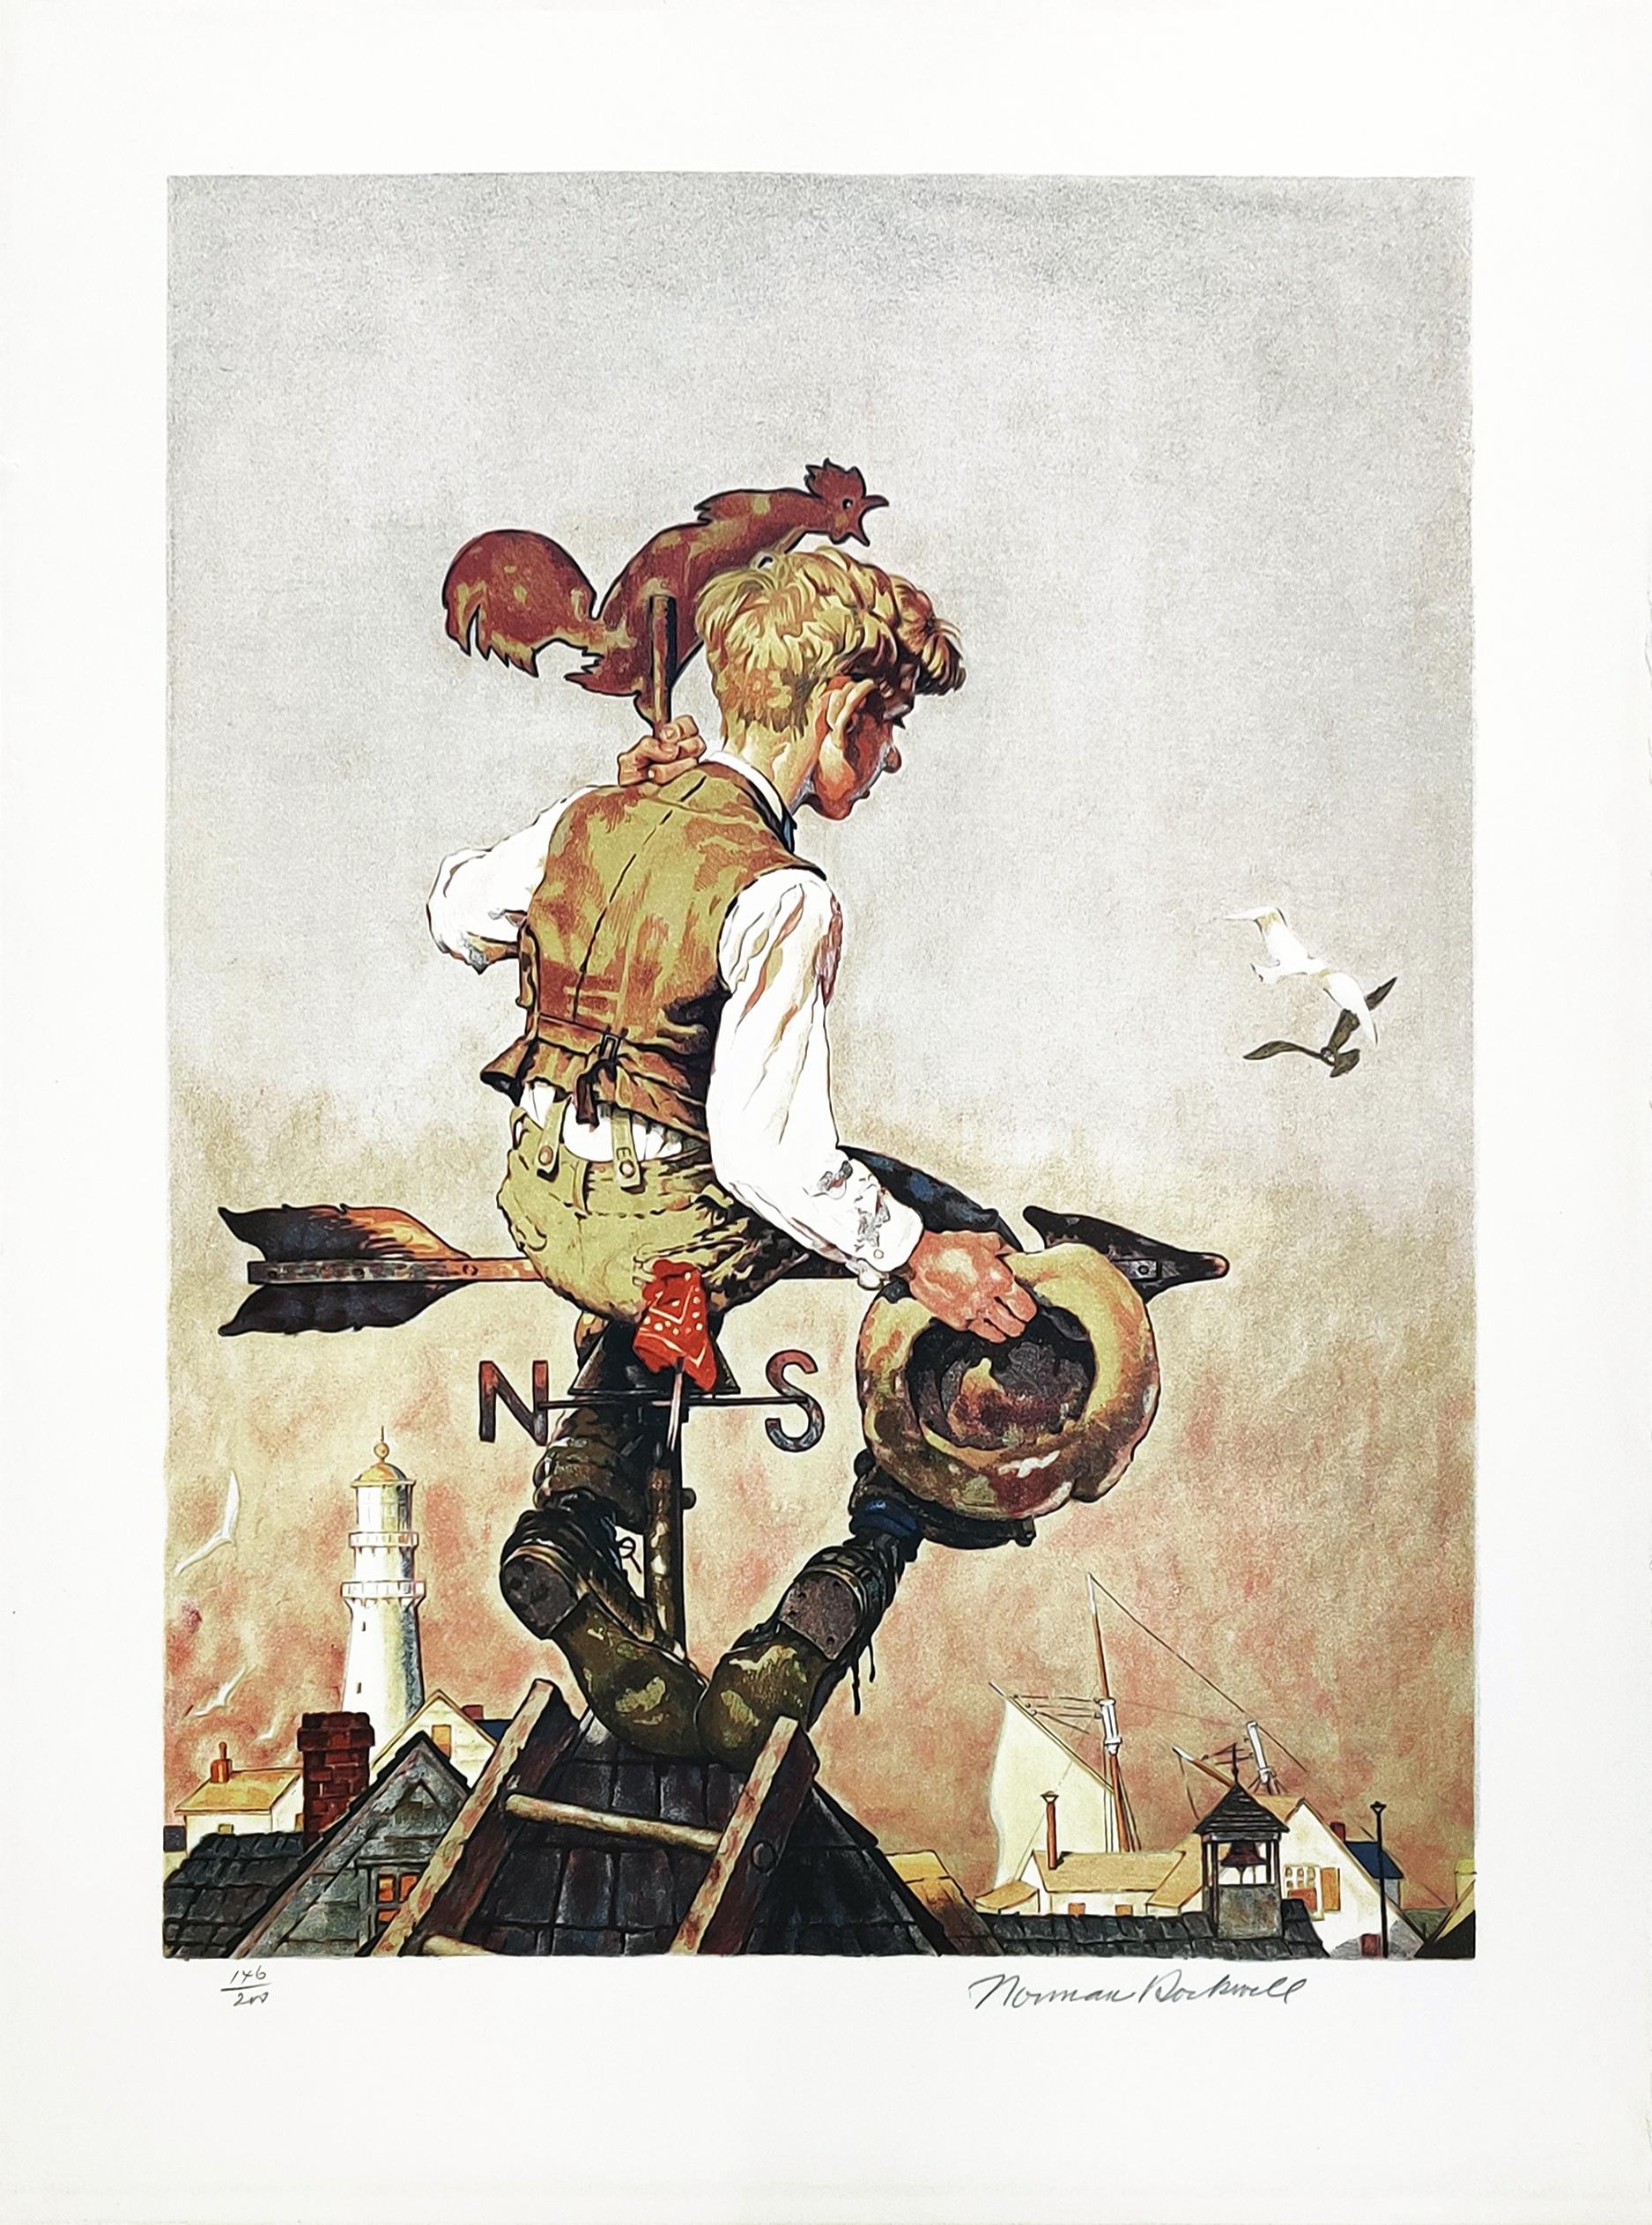 UNDER SAIL - Print by Norman Rockwell